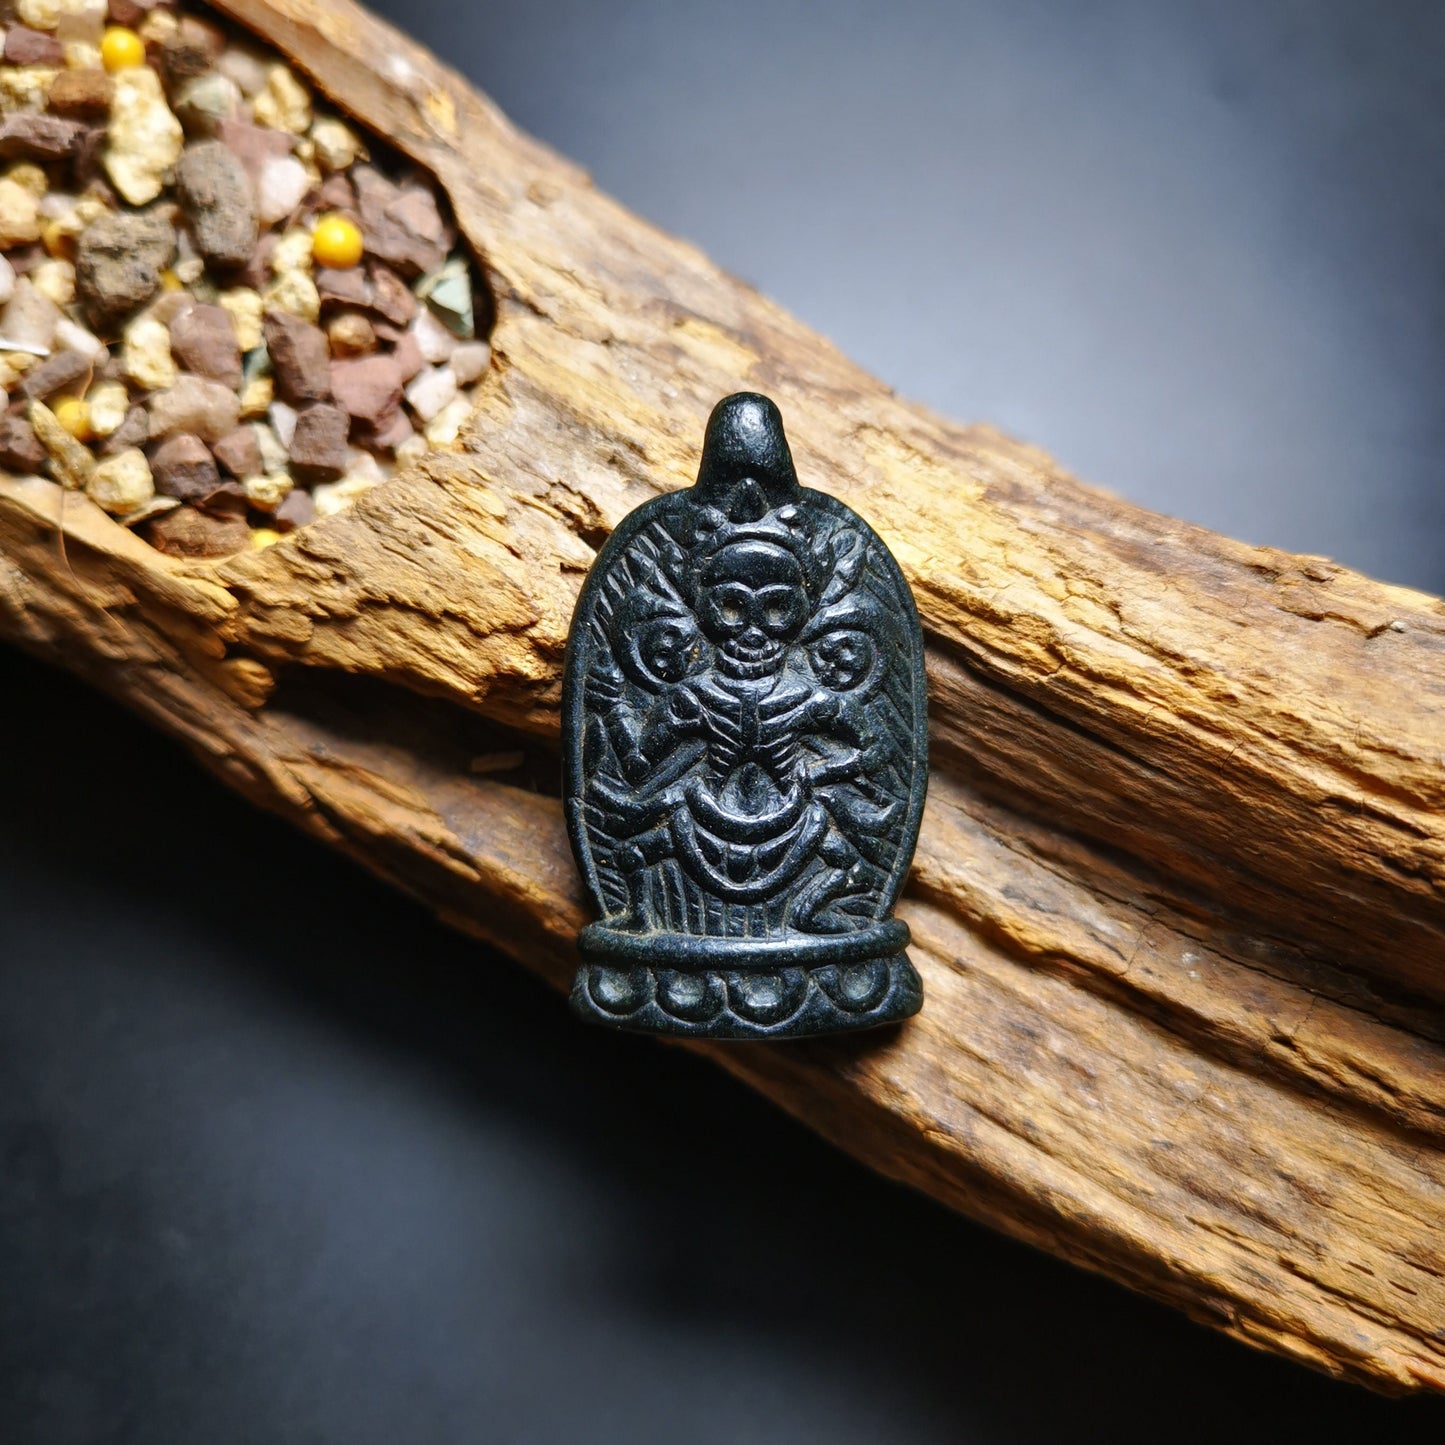 Gandhanra Antique Hand Carved Tibetan Amulet Pendant,Masters of Sitavana Skull,Made of Obsidian,100 Years Old